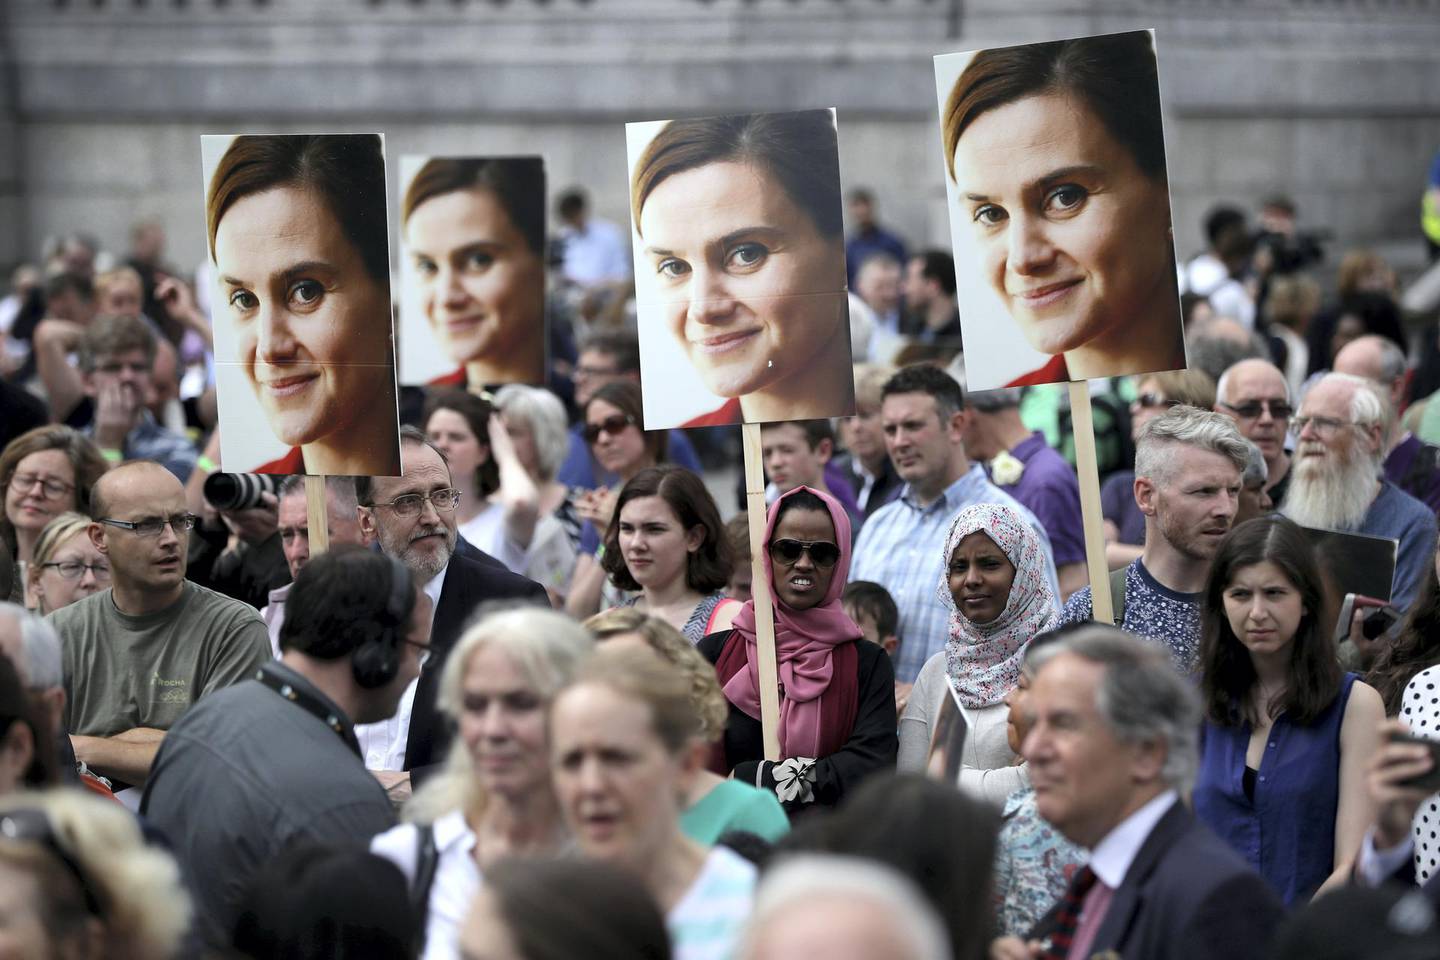 LLONDON, UNITED KINGDOM - JUNE 22:  Members of the public attend a memorial event for murdered Labour MP Jo Cox at Trafalger Square on June 22, 2016 in London, United Kingdom. On what would have been her 42nd birthday, Labour MP Jo Cox is remembered worldwide in a series of #moreincommon events today. The Labour MP for Batley and Spen was shot and stabbed in the street on June 16 and later died. A fund set up in her name has raised over Ã‚Â£1.23 M GBP to date  (Photo by Dan Kitwood/Getty Images)